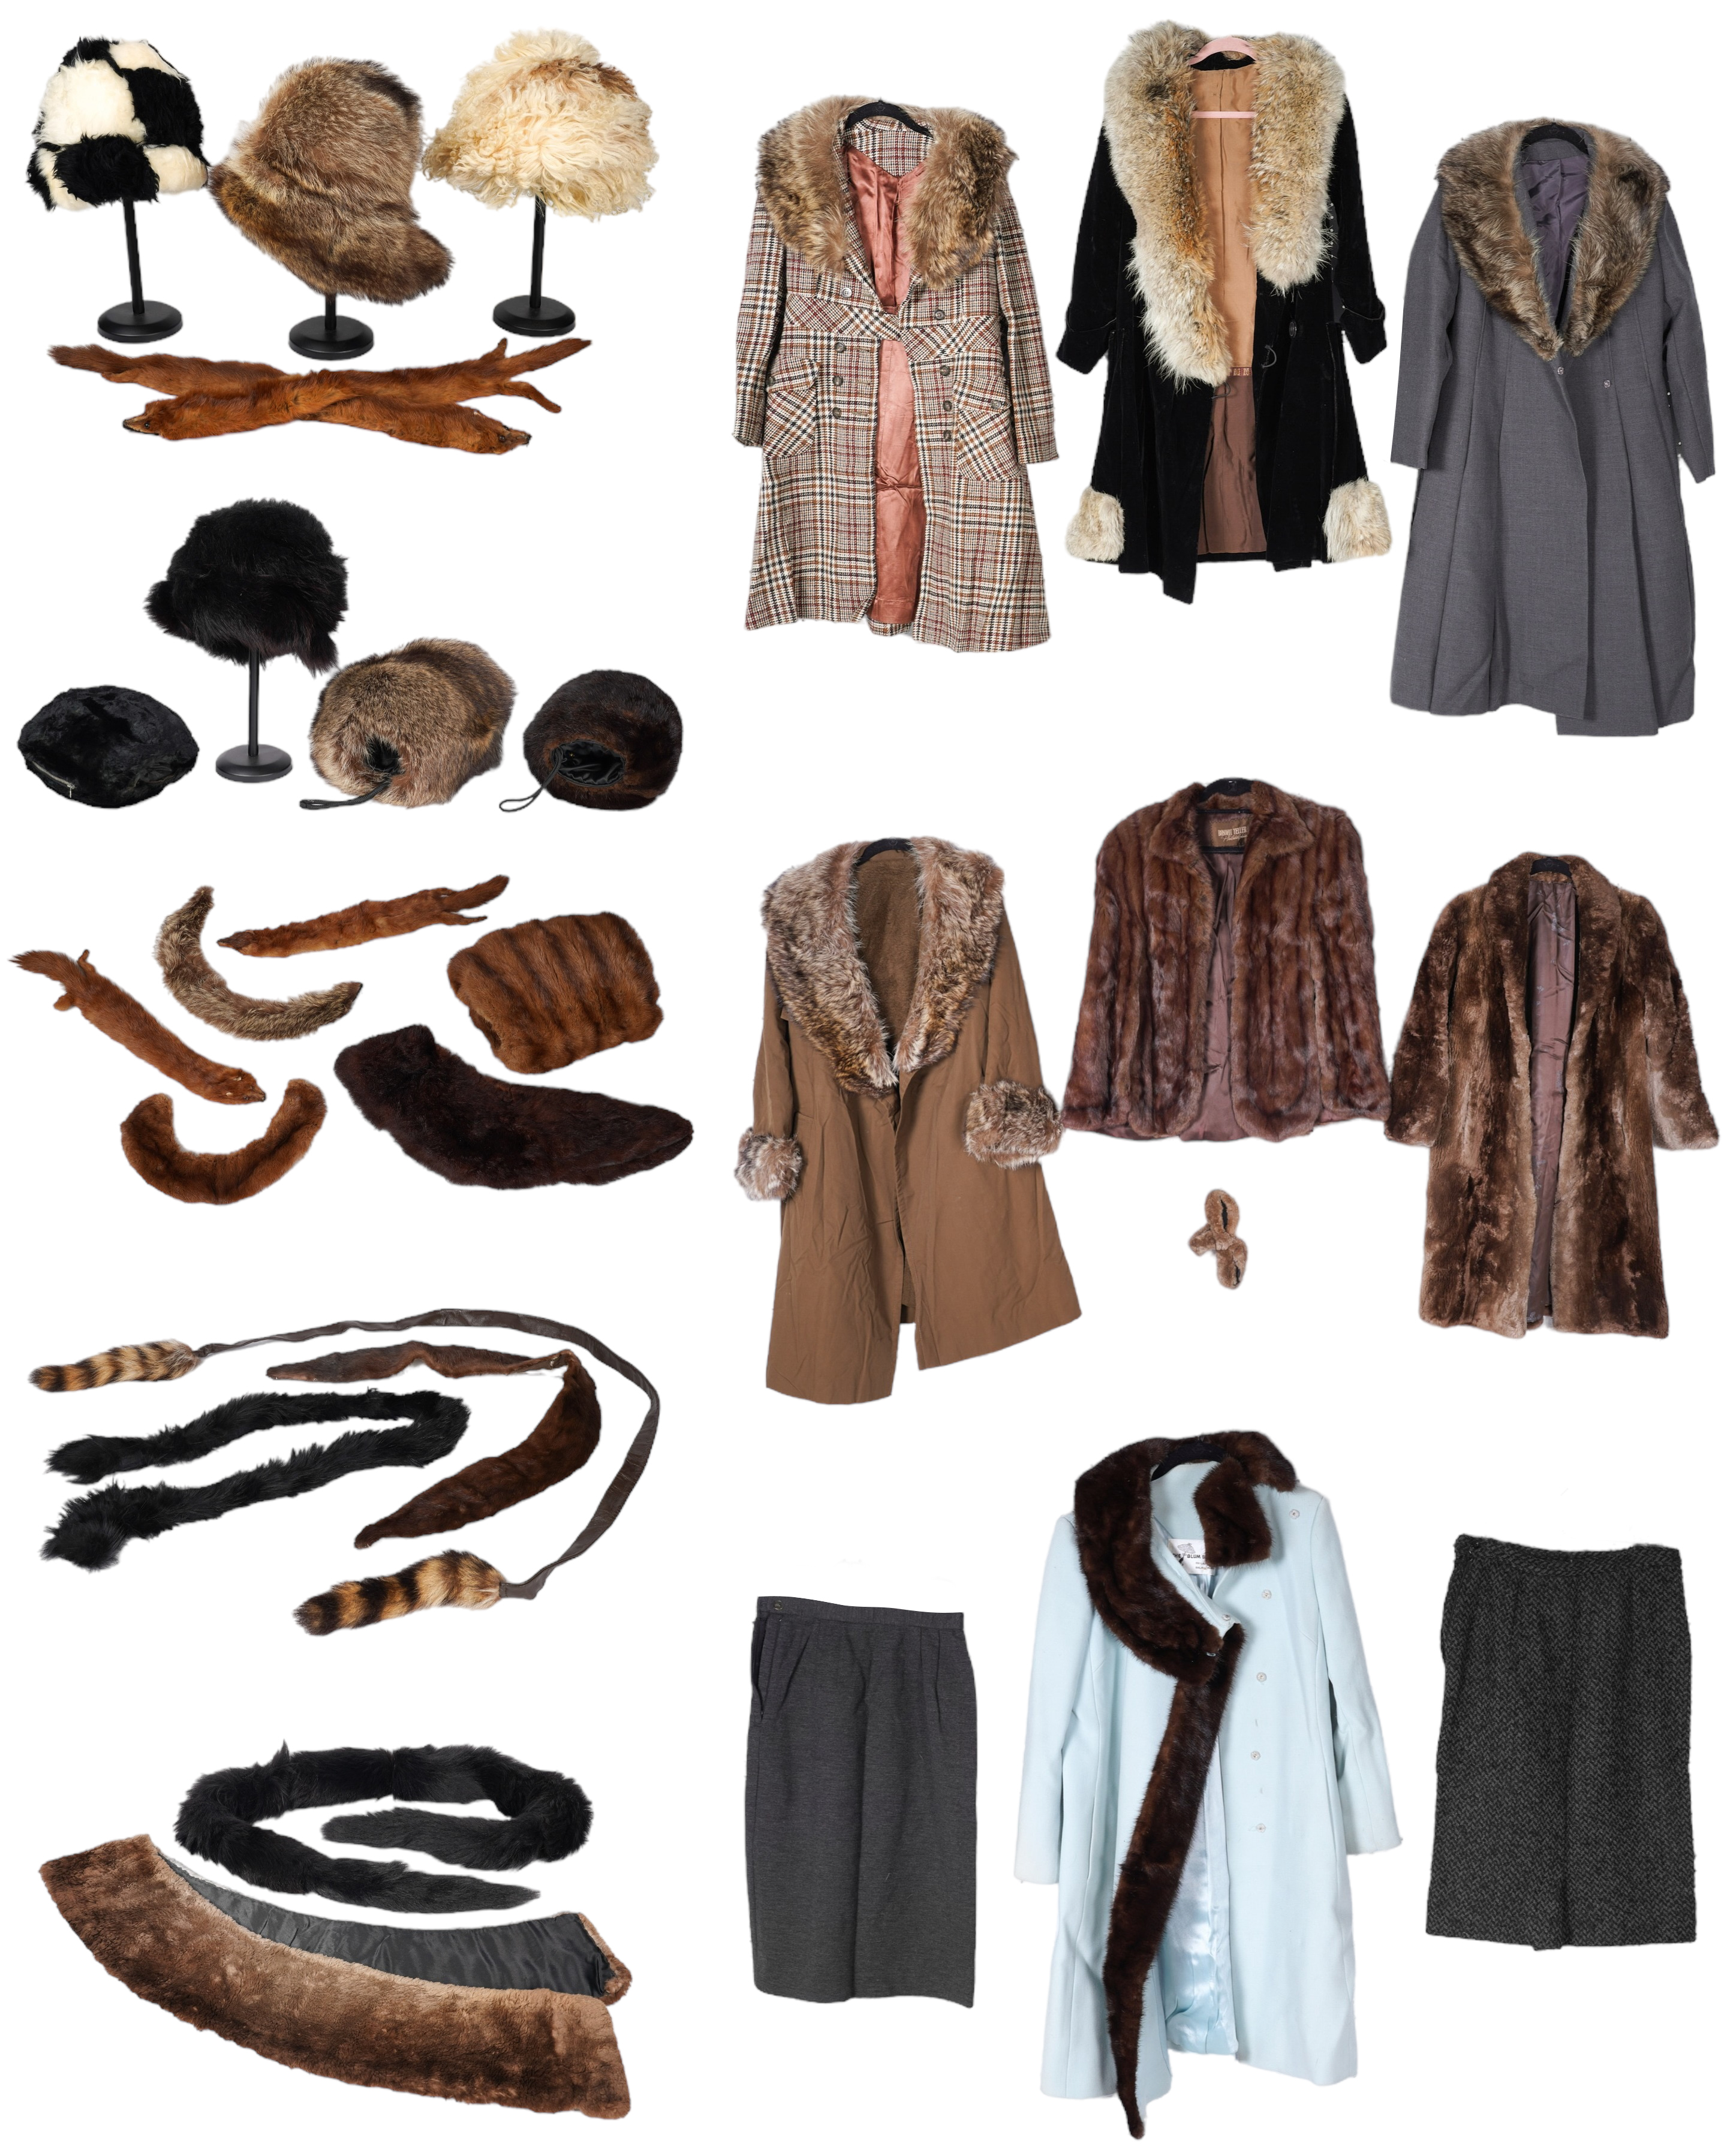 A Large Vintage Fur Coat and Accessories 2e2140